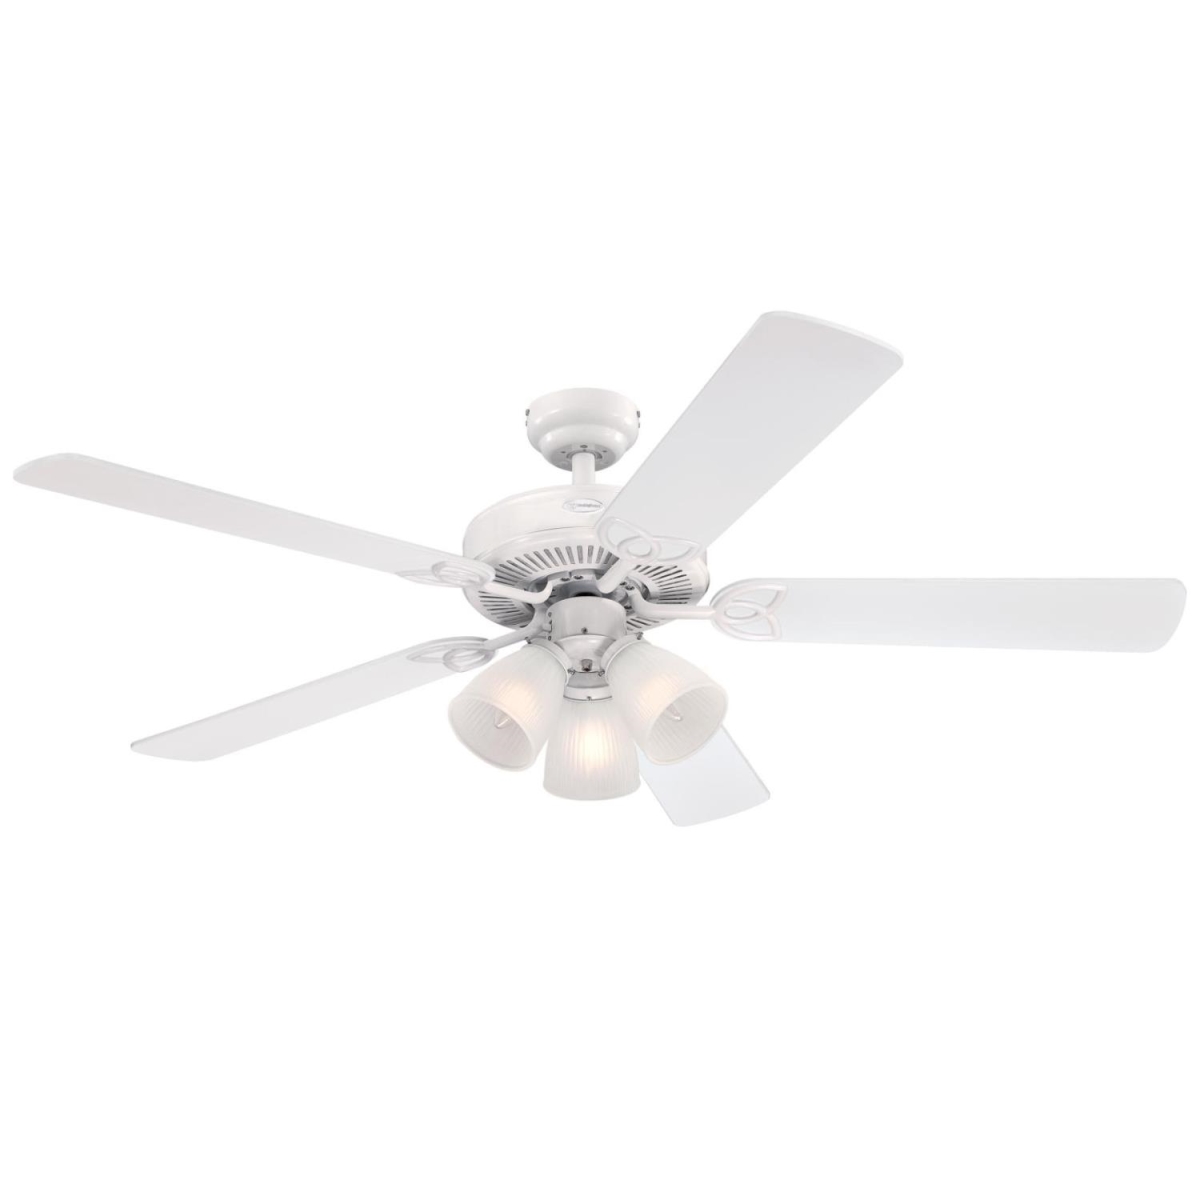 Picture of Westinghouse 7236400 52 in. Ceiling Fan with Dimmable LED Light Fixture White Finish Reversible Blades White & White Washed Pine Frosted Ribbed Glass